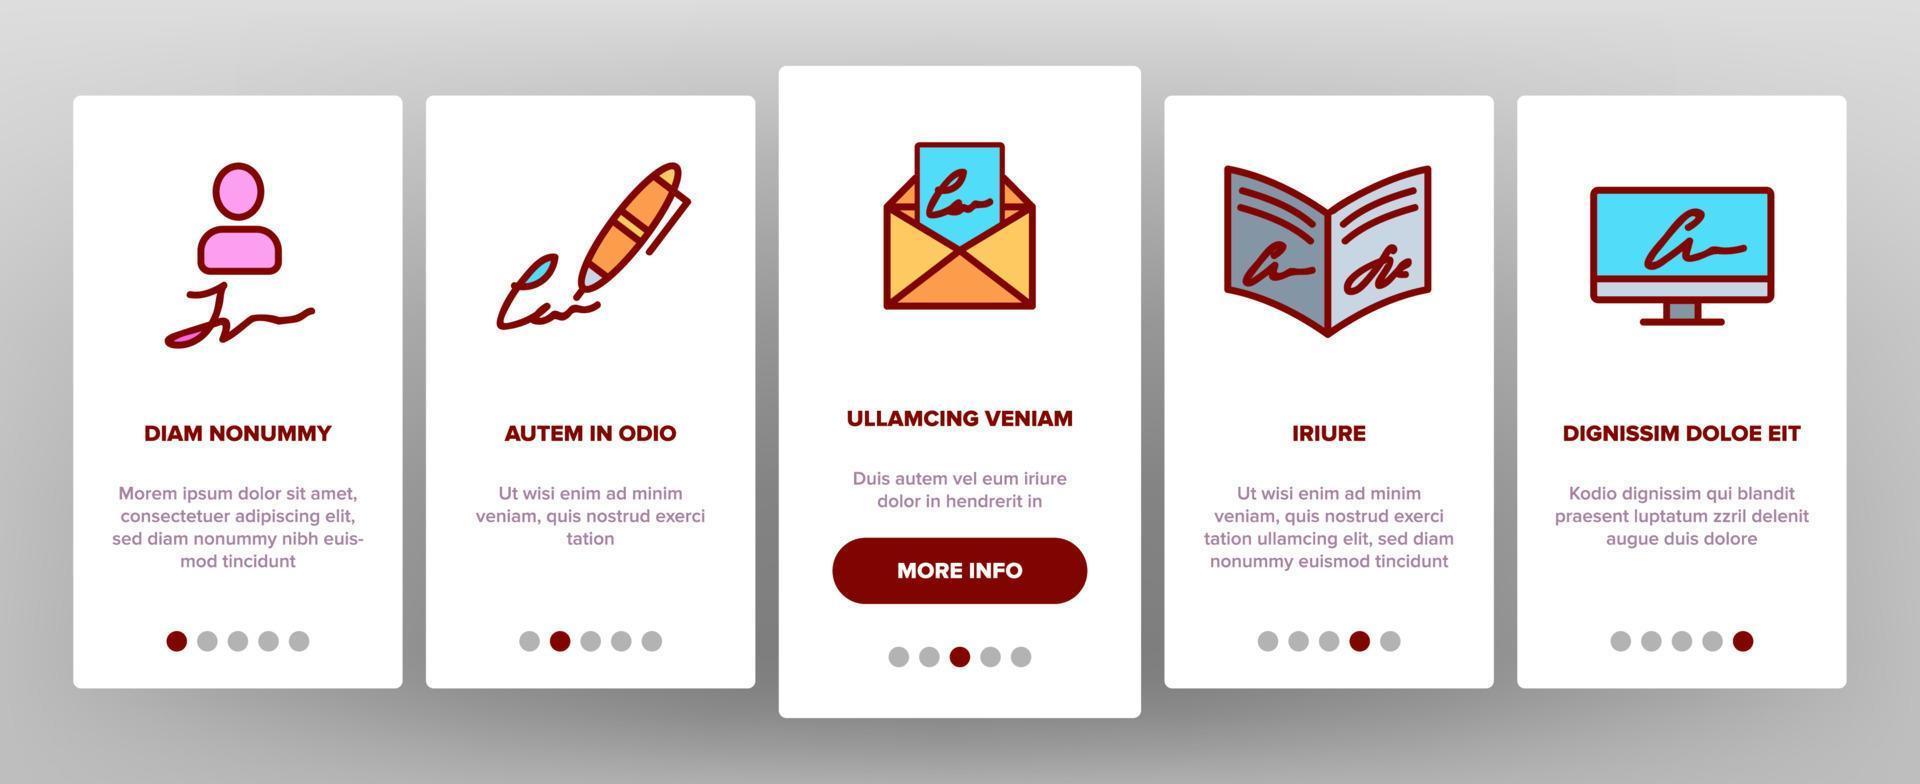 Signature Signing Onboarding Icons Set Vector